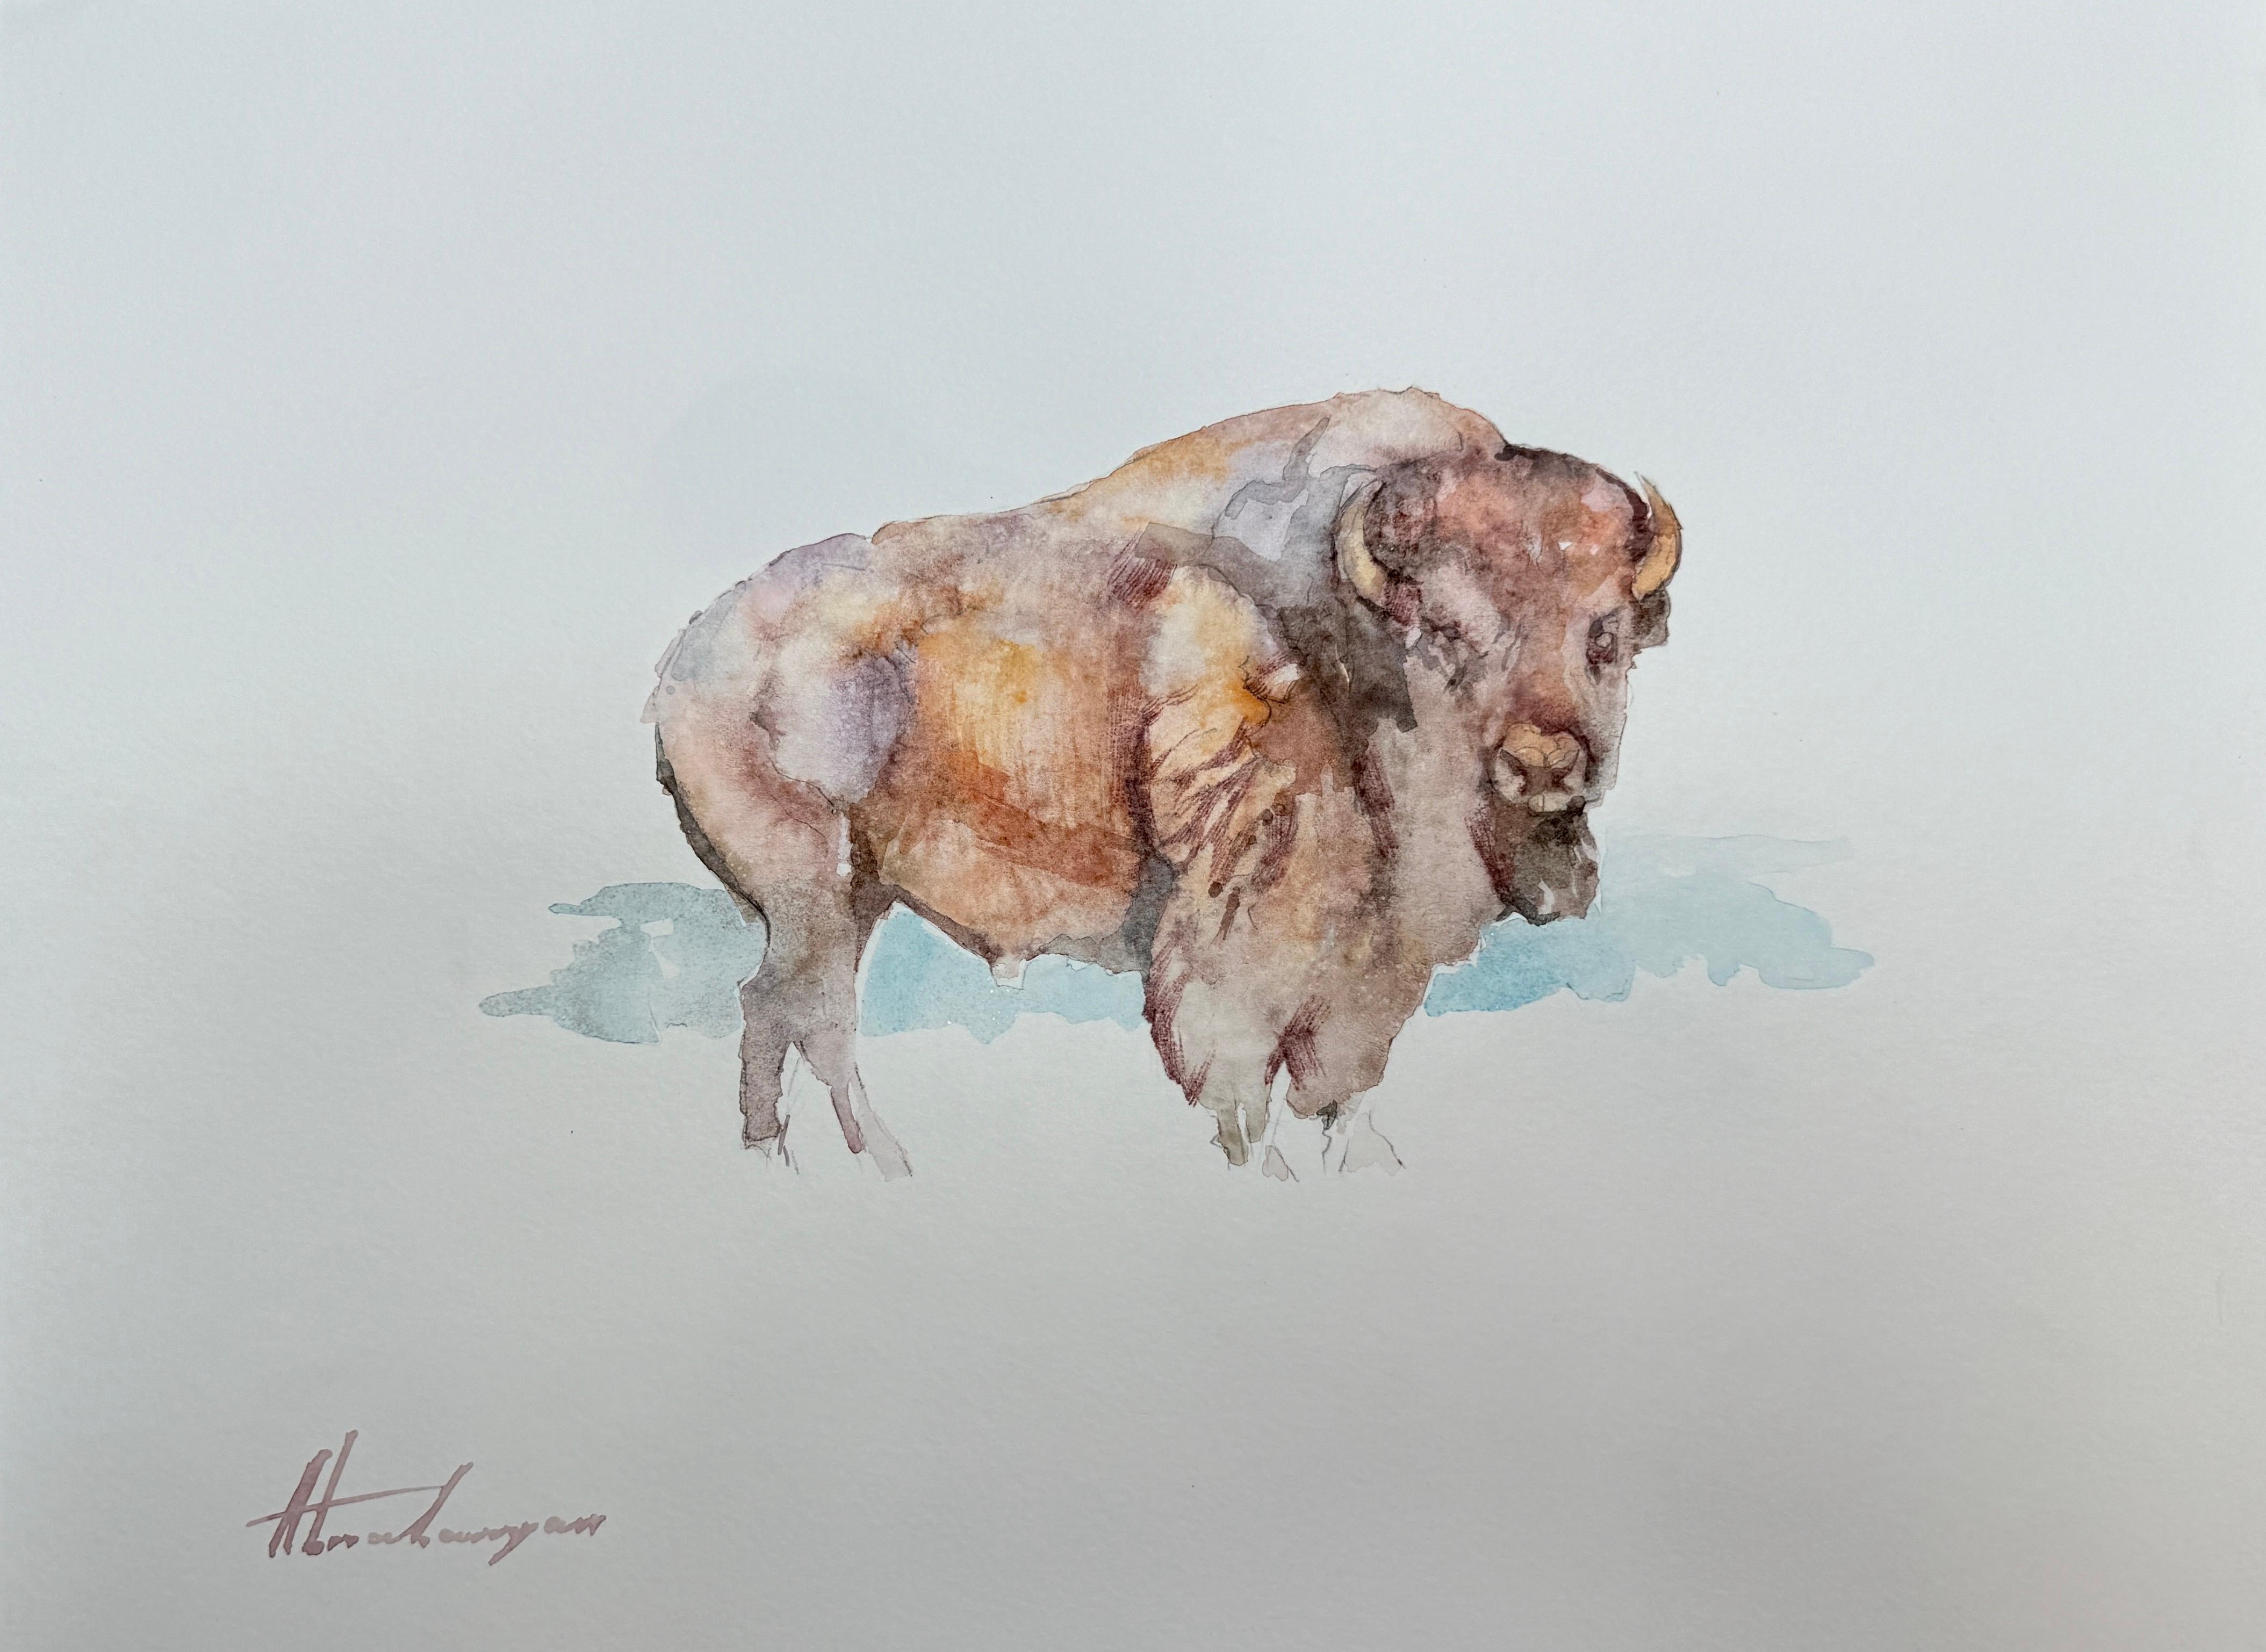 Artyom Abrahamyan Animal Art - Bison, Animal, Watercolor on paper, Handmade Painting, One of a Kind